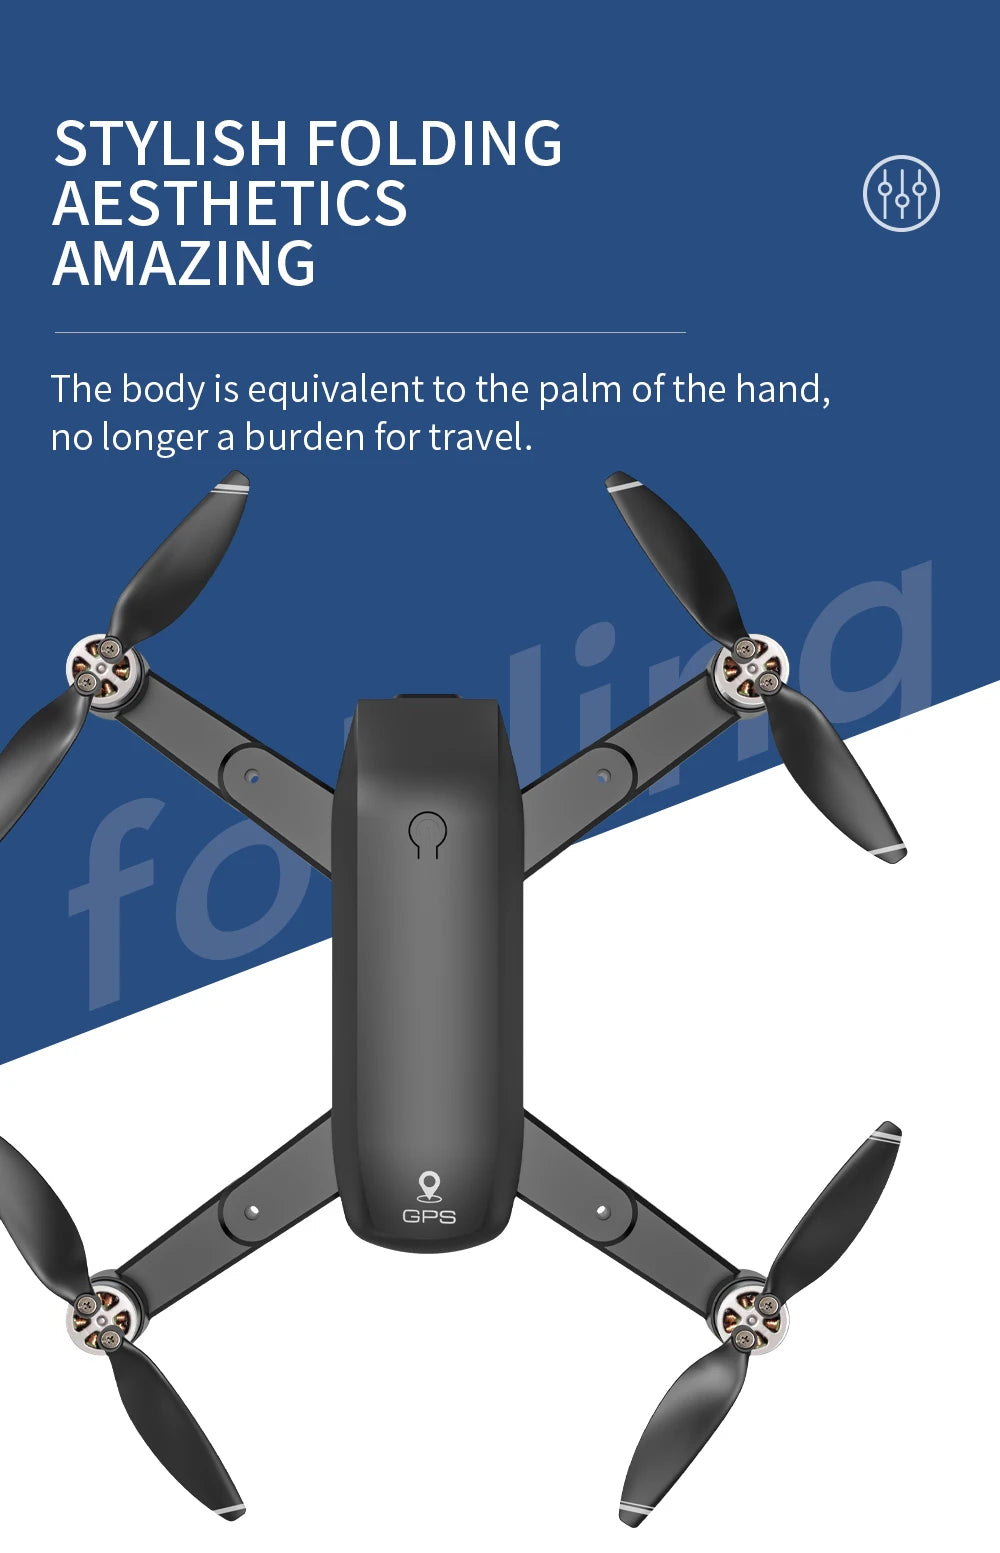 ZLRC SG700 MAX Drone, stylish folding aesthetics amazing the body is equivalent to the of the hand